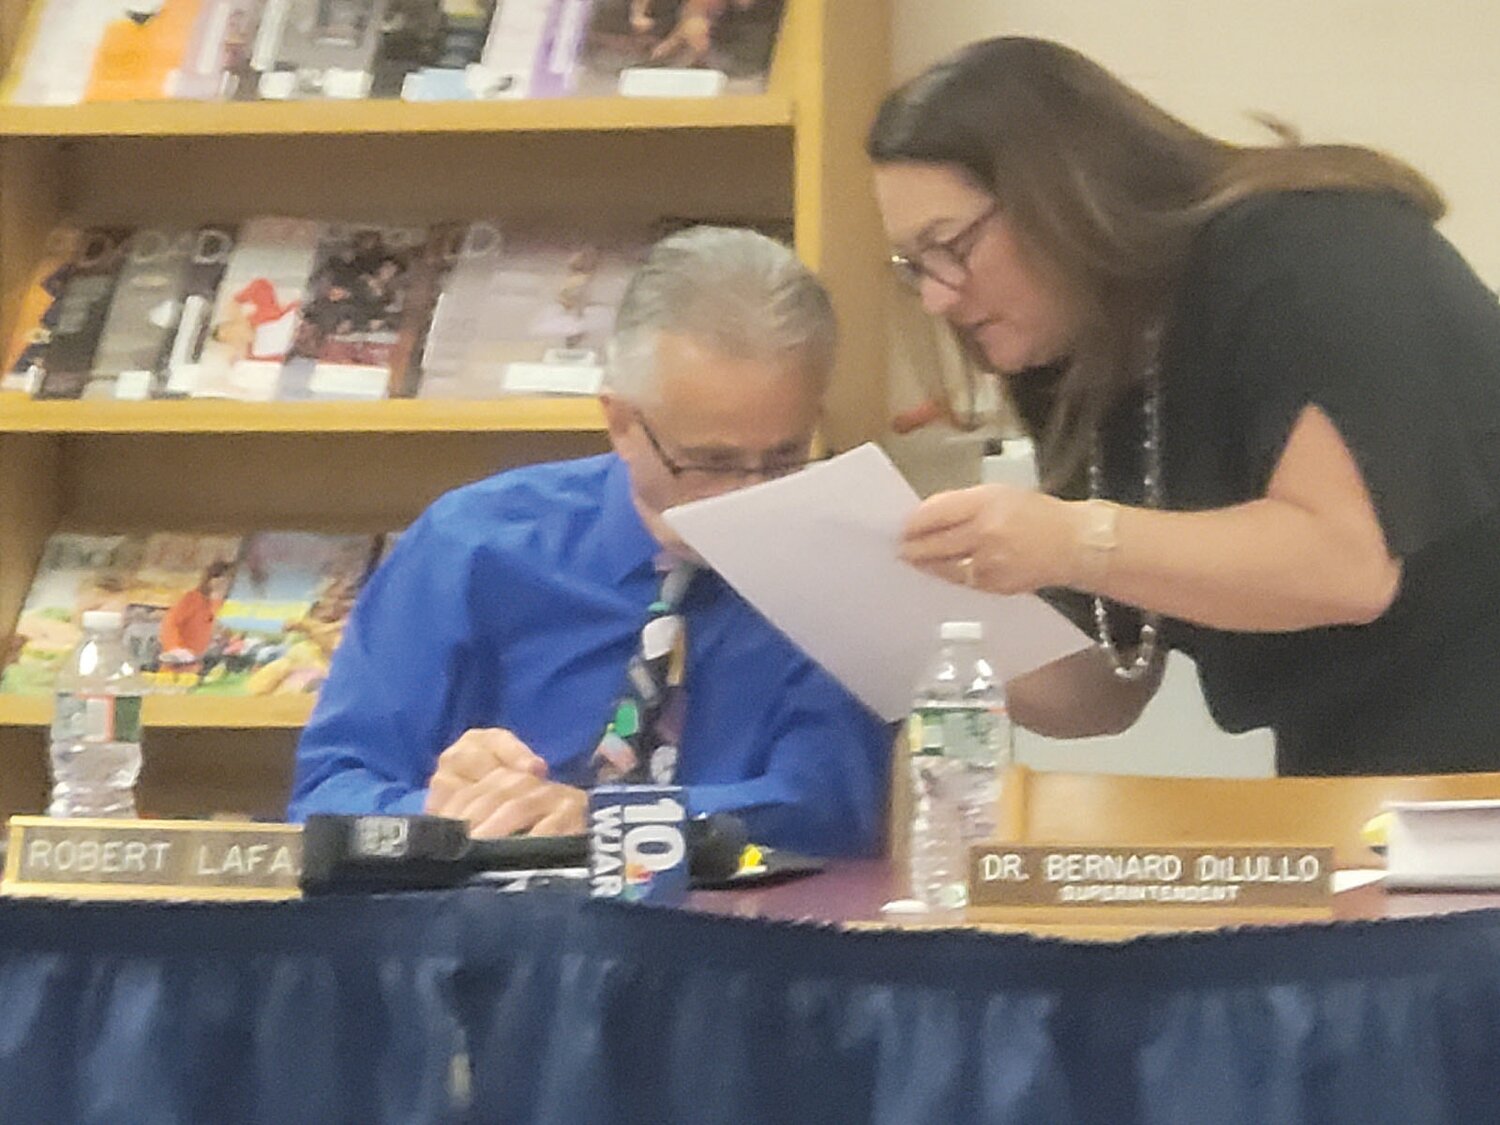 TAKING A STAND: School Committee Chairman Robert LaFazia and member Susan Mansolillo confer during one of last week’s charged meetings.